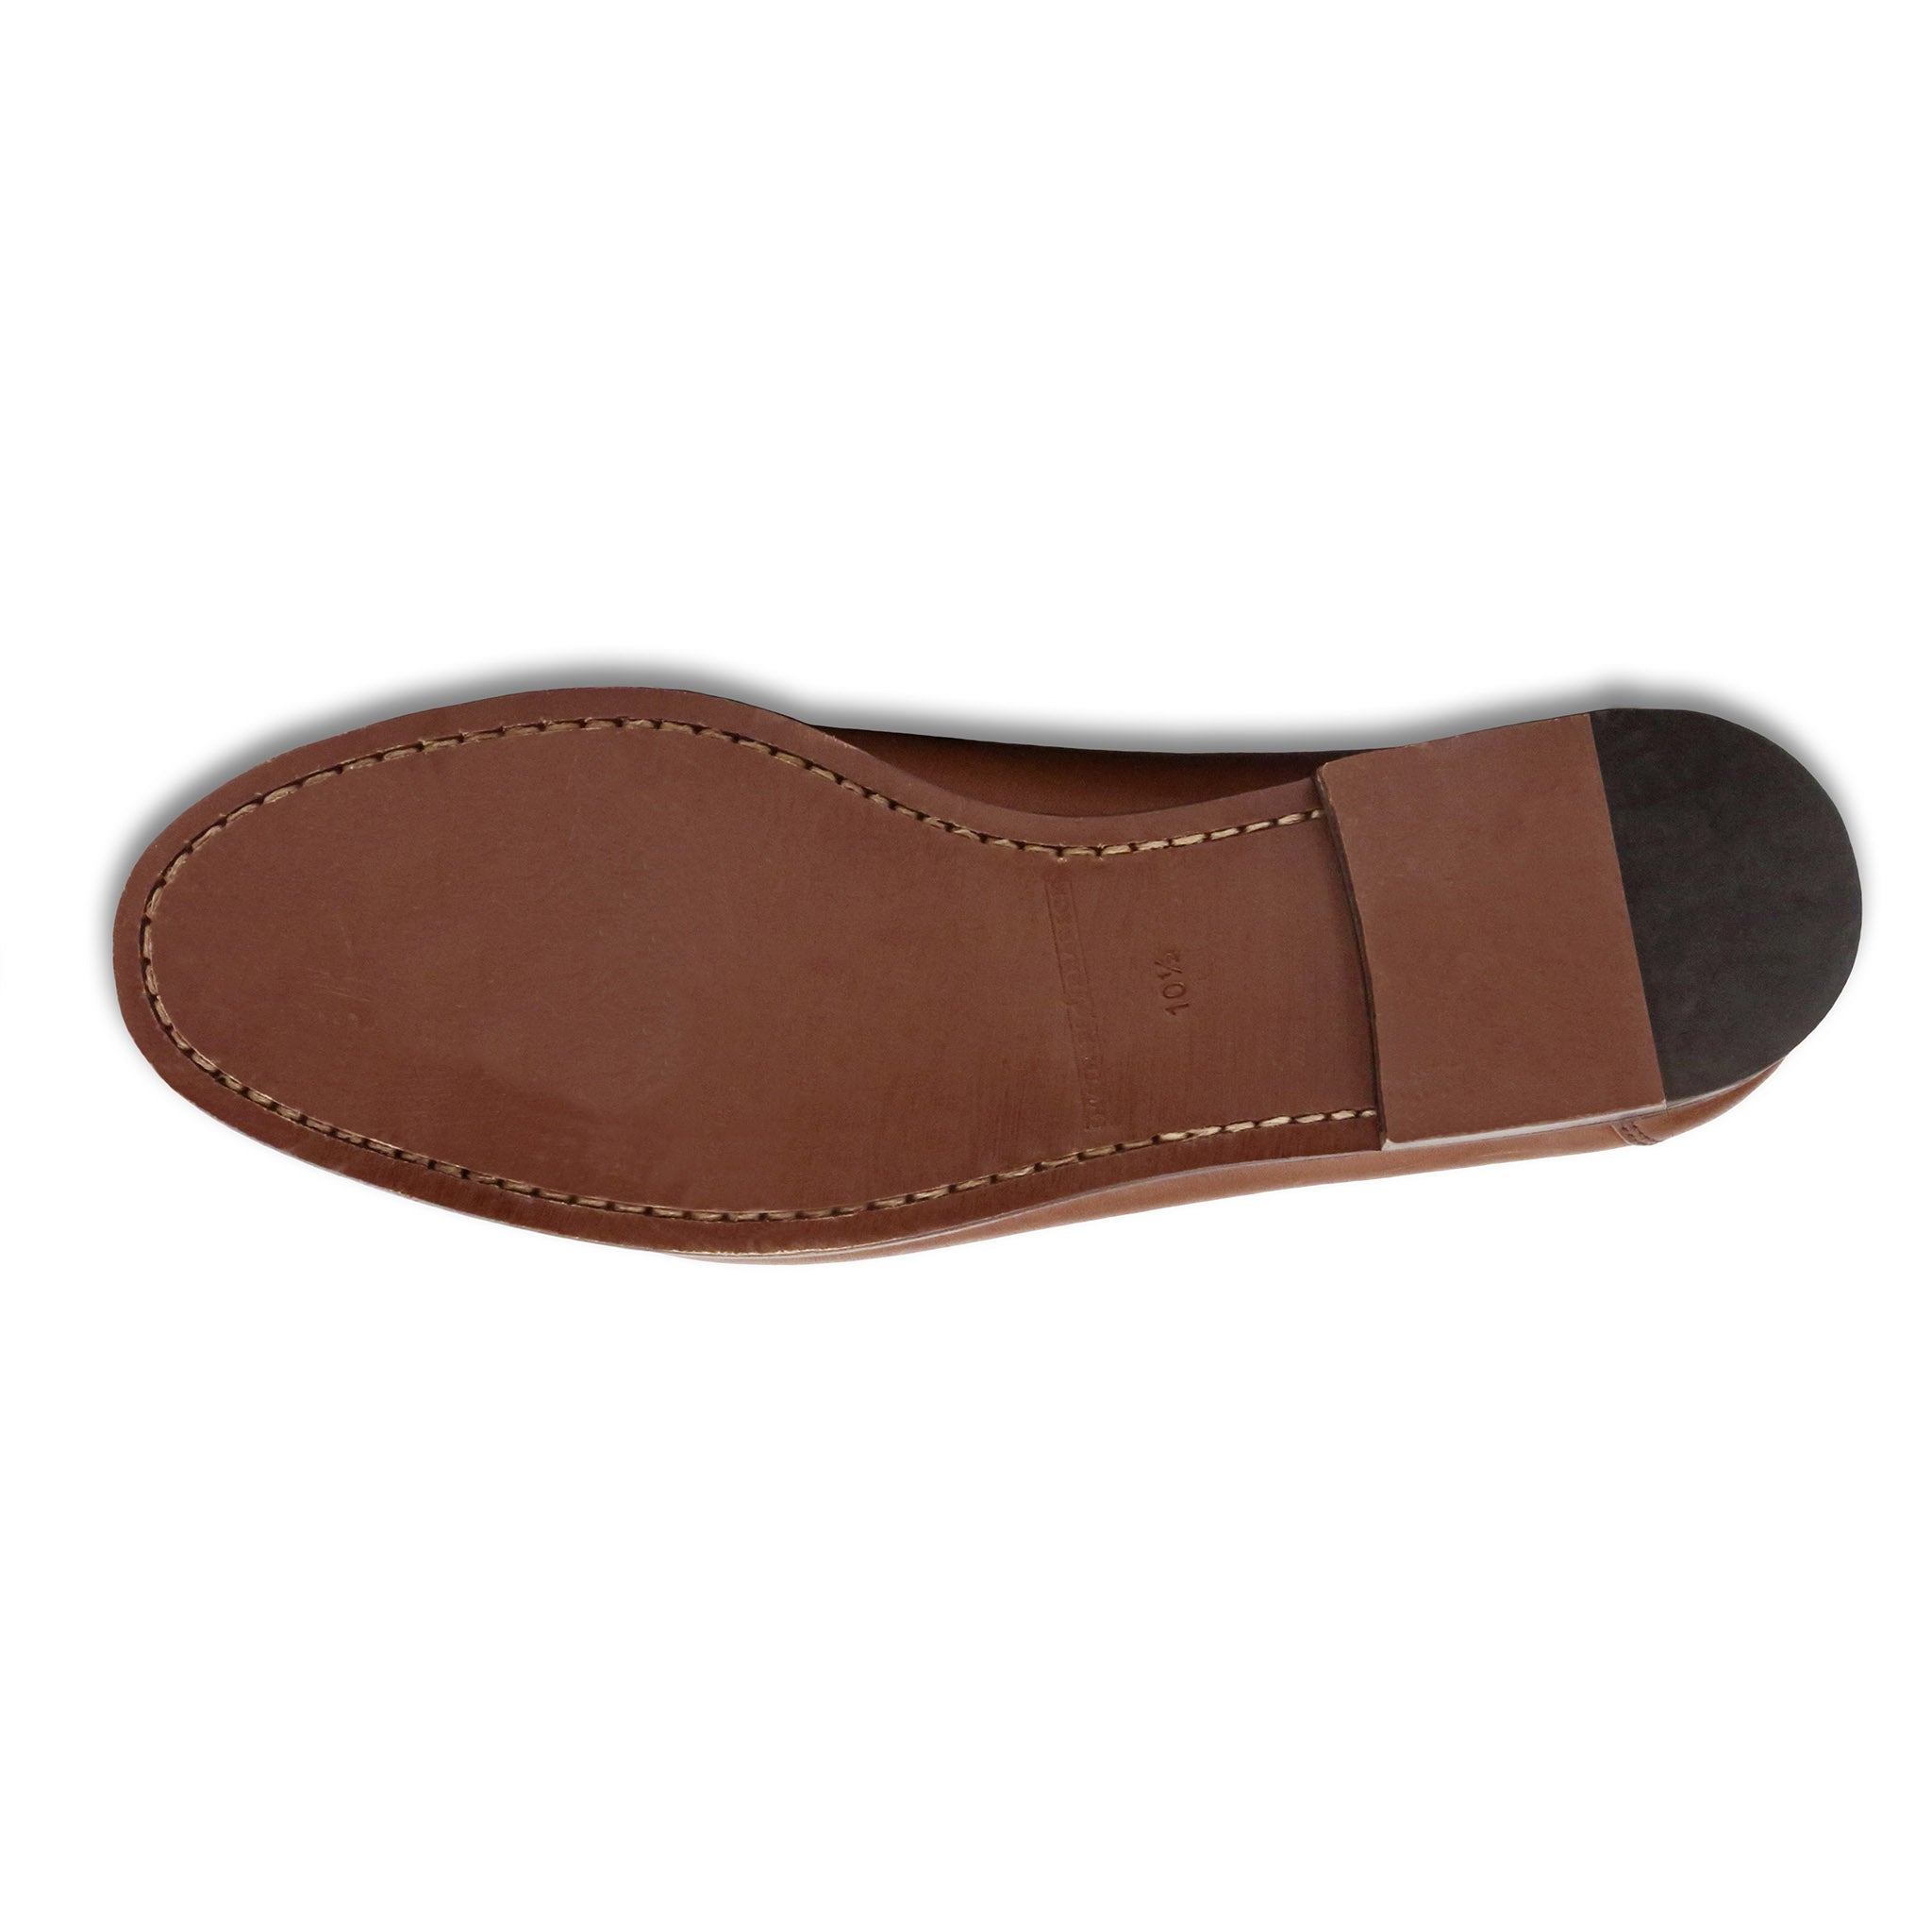 Surcingle Downing Bit Loafers (Dark Navy-Forest) (Chestnut Leather)